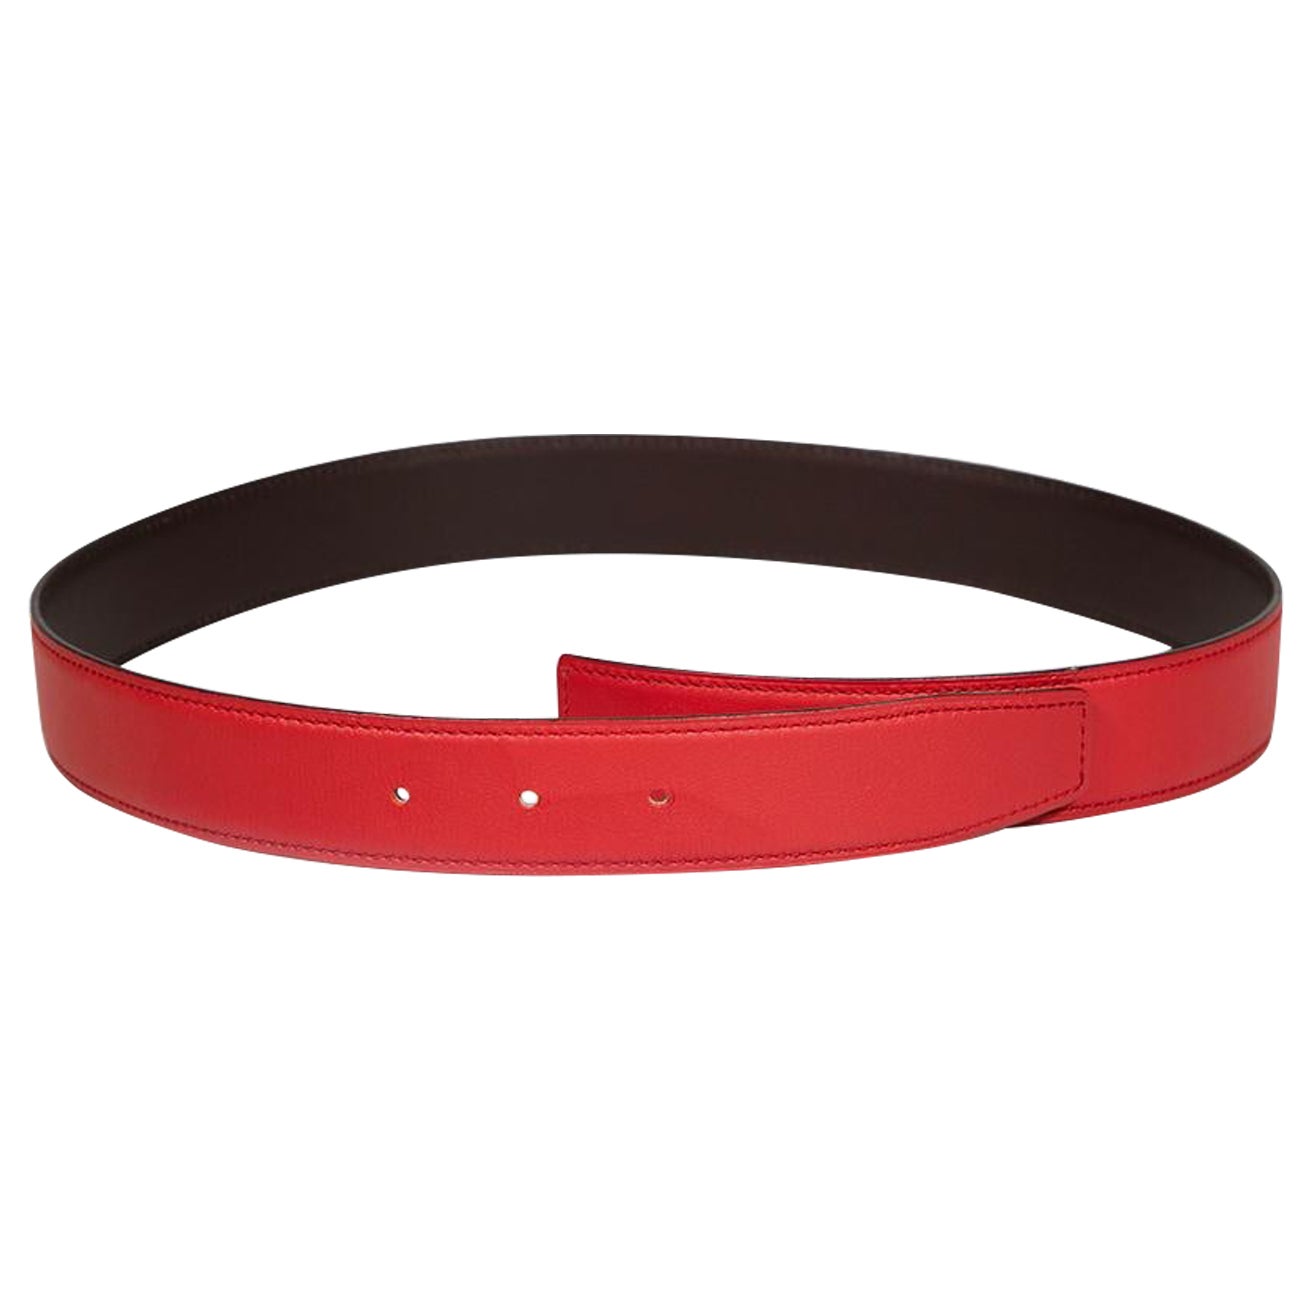 What is the point of a reversible belt?